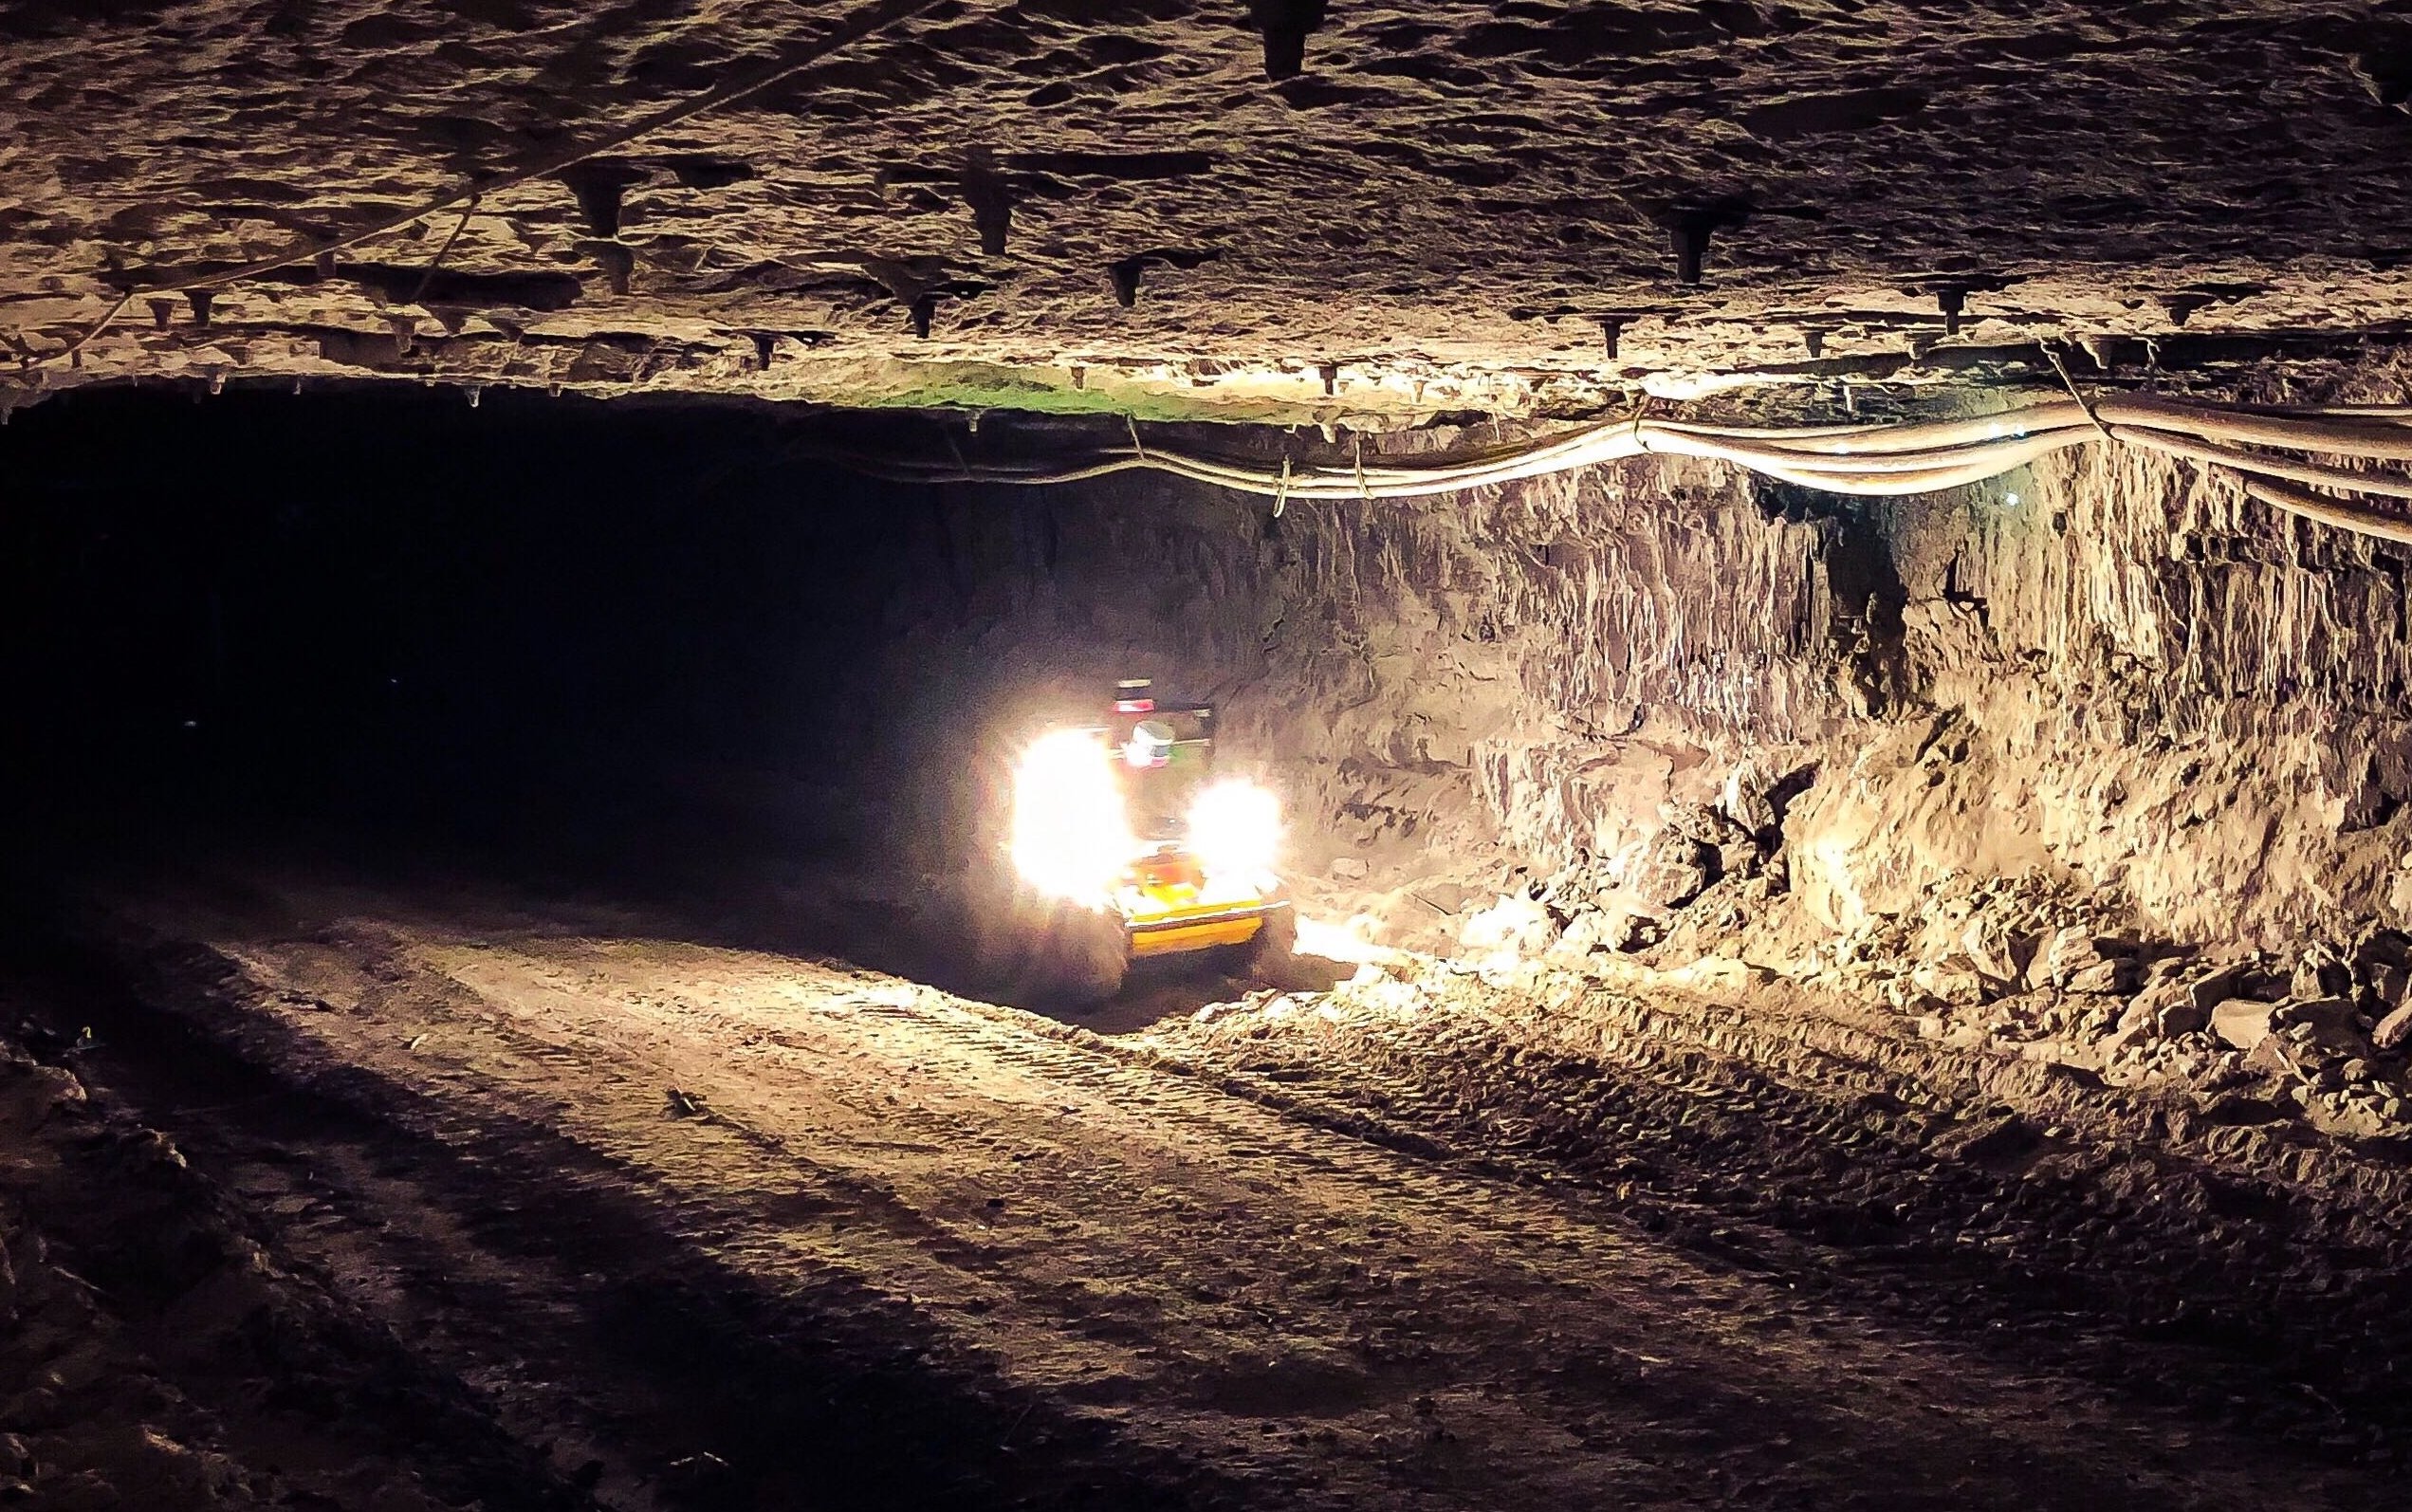 A ground robot equipped with a lidar in a mine 270m below the ground in West Virginia